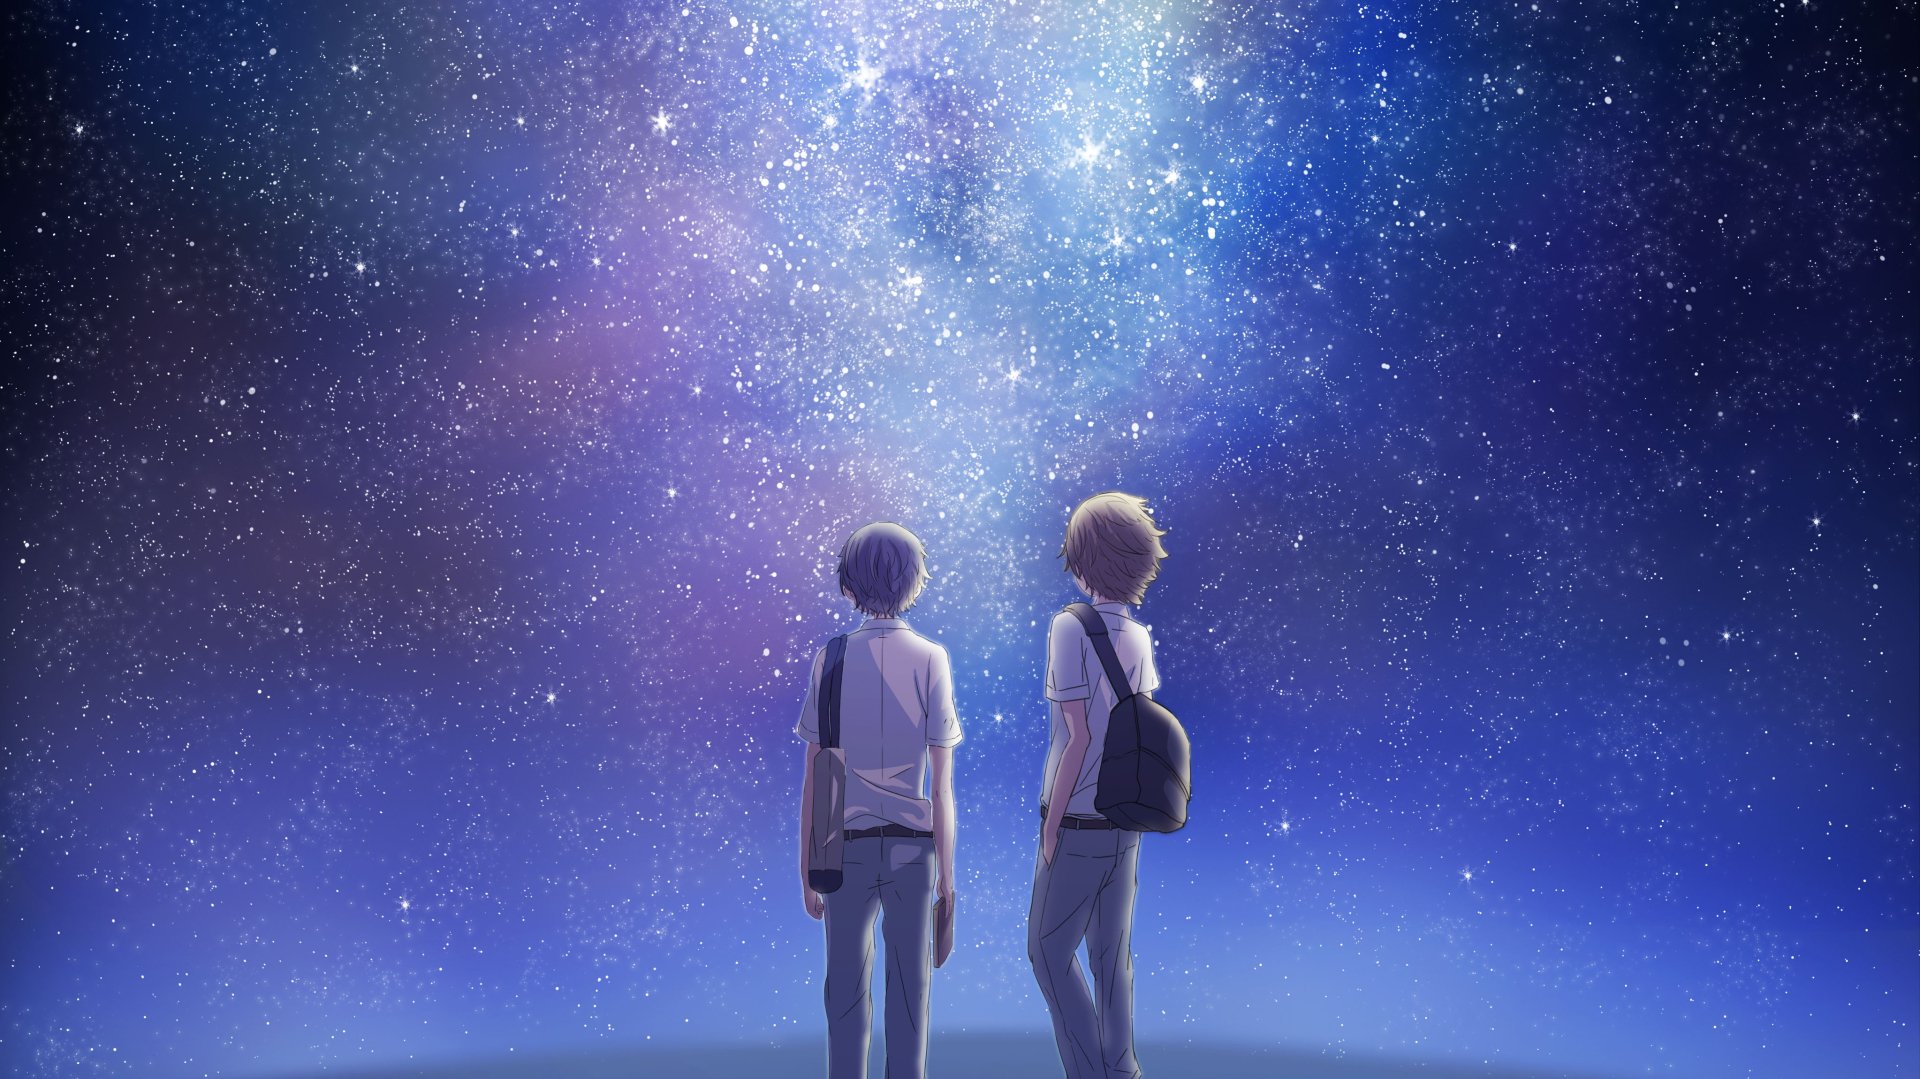 Your Lie In April Tumblr Wallpapers